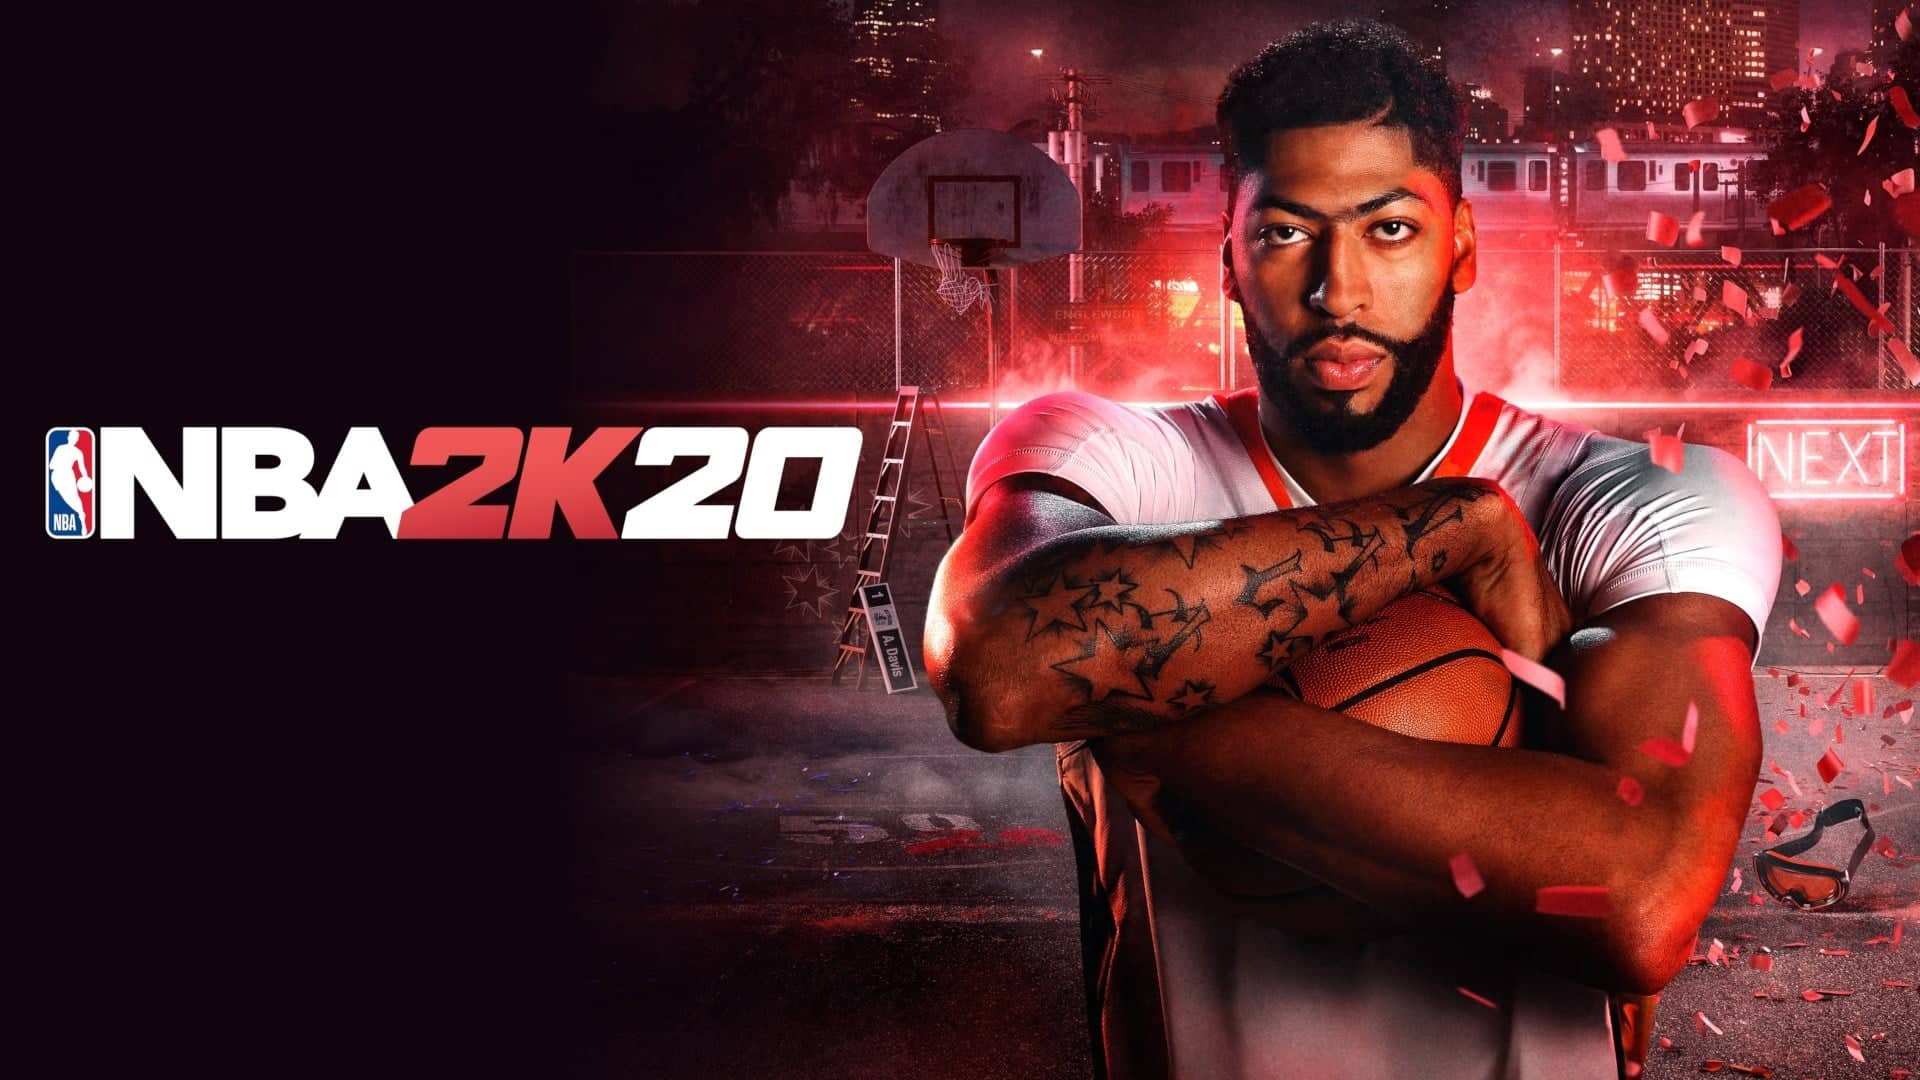 Welcome to the Next: NBA® 2K20 Now Available Worldwide